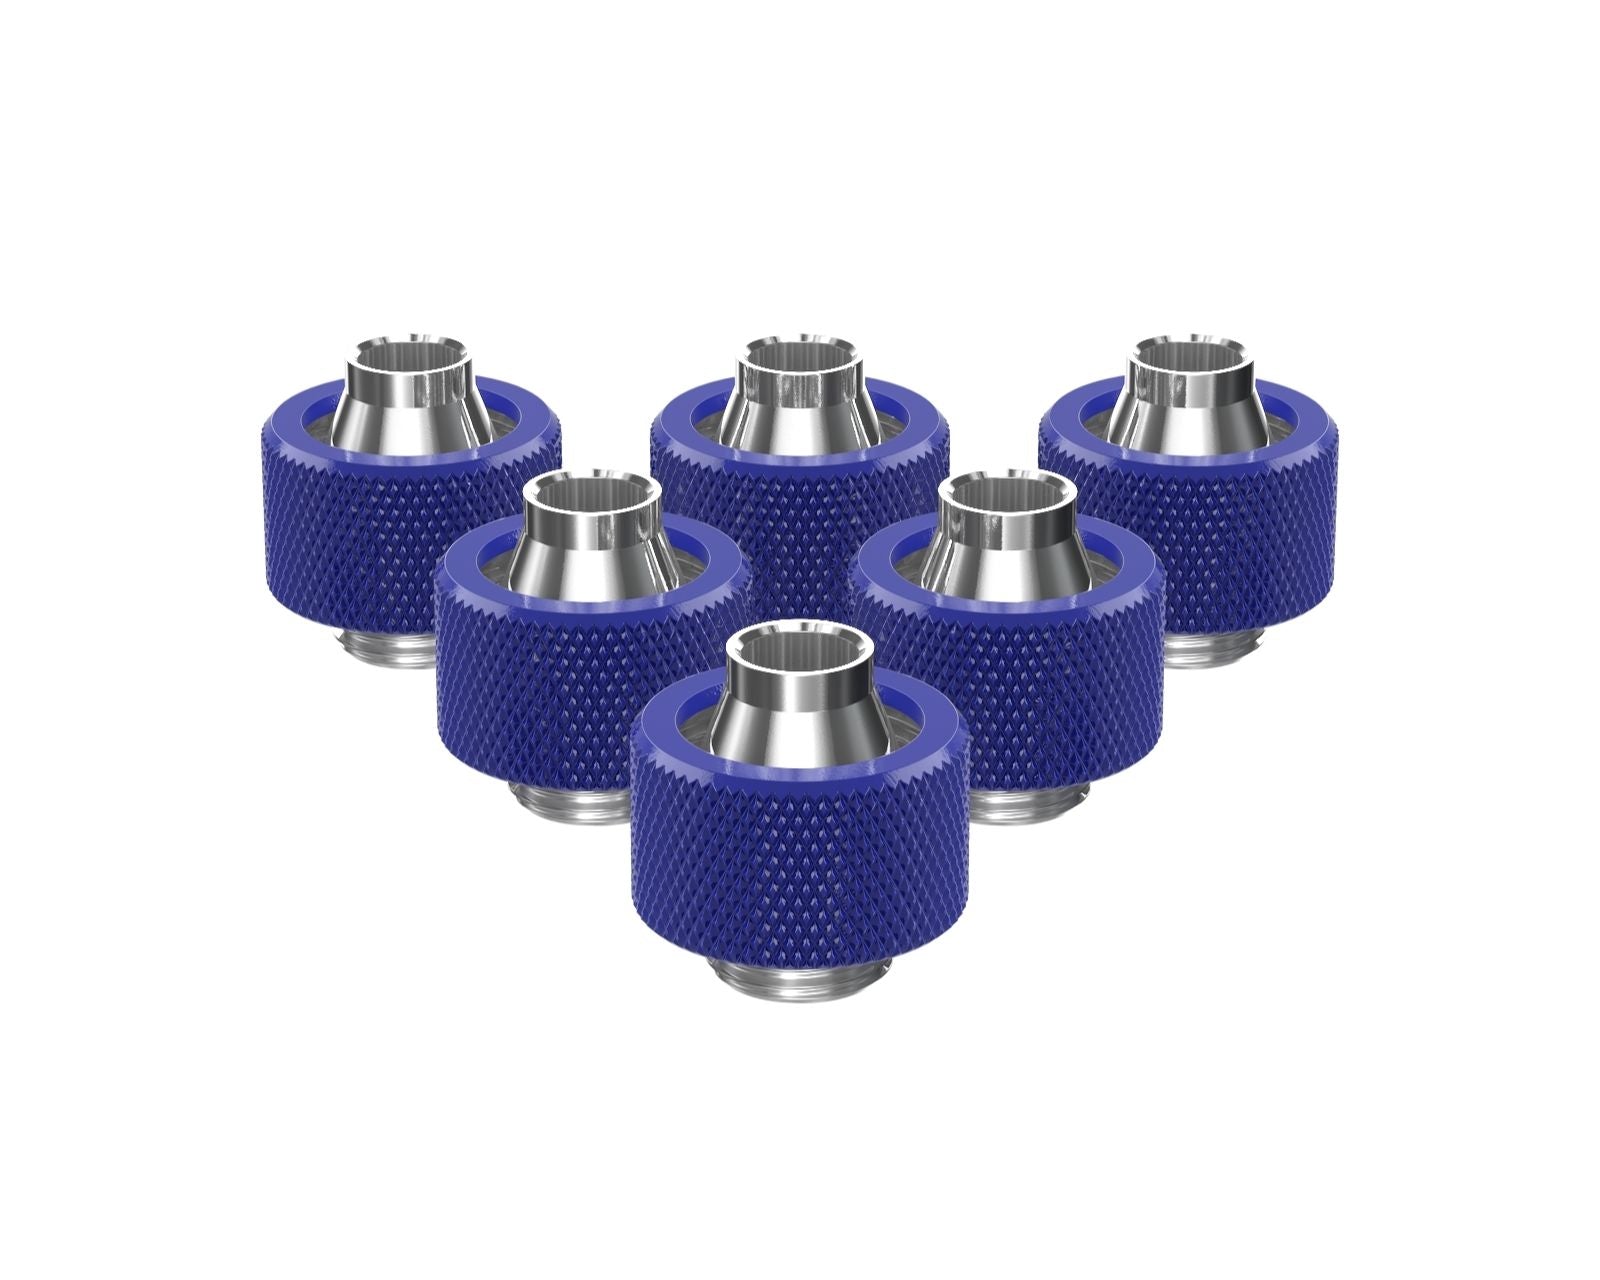 PrimoChill SecureFit SX - Premium Compression Fitting For 3/8in ID x 5/8in OD Flexible Tubing 6 Pack (F-SFSX58-6) - Available in 20+ Colors, Custom Watercooling Loop Ready - True Blue